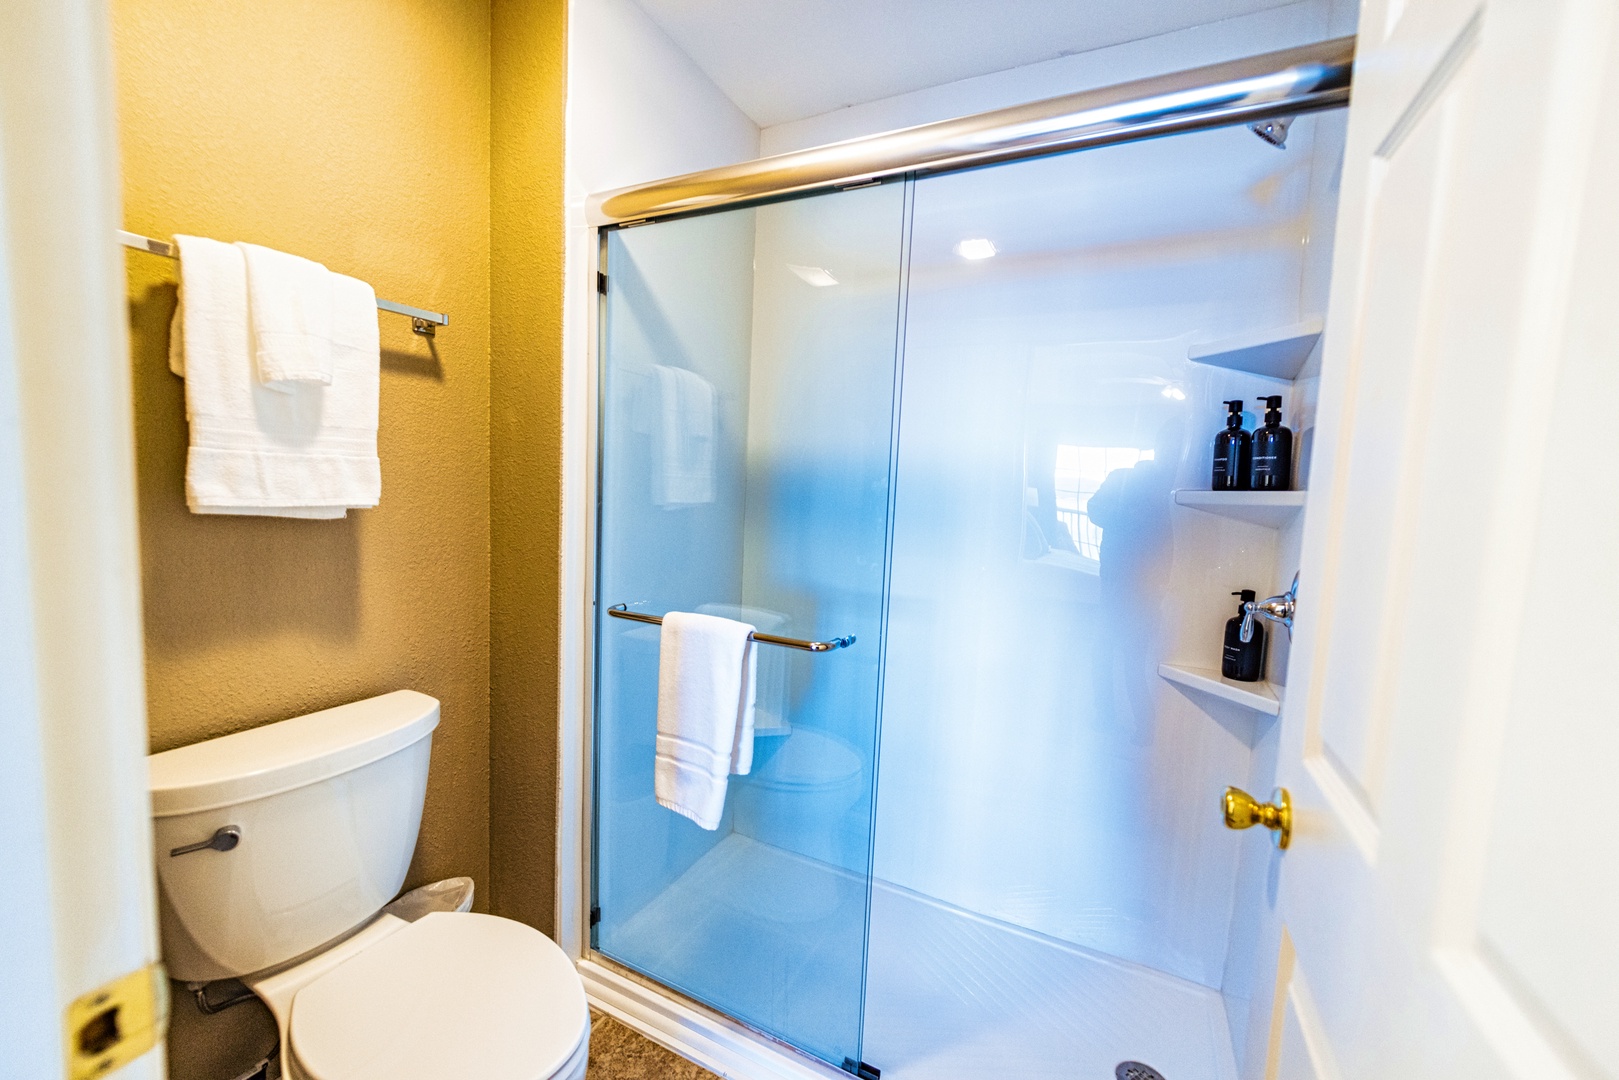 The king ensuite includes a single vanity, glass shower, & walk-in closet